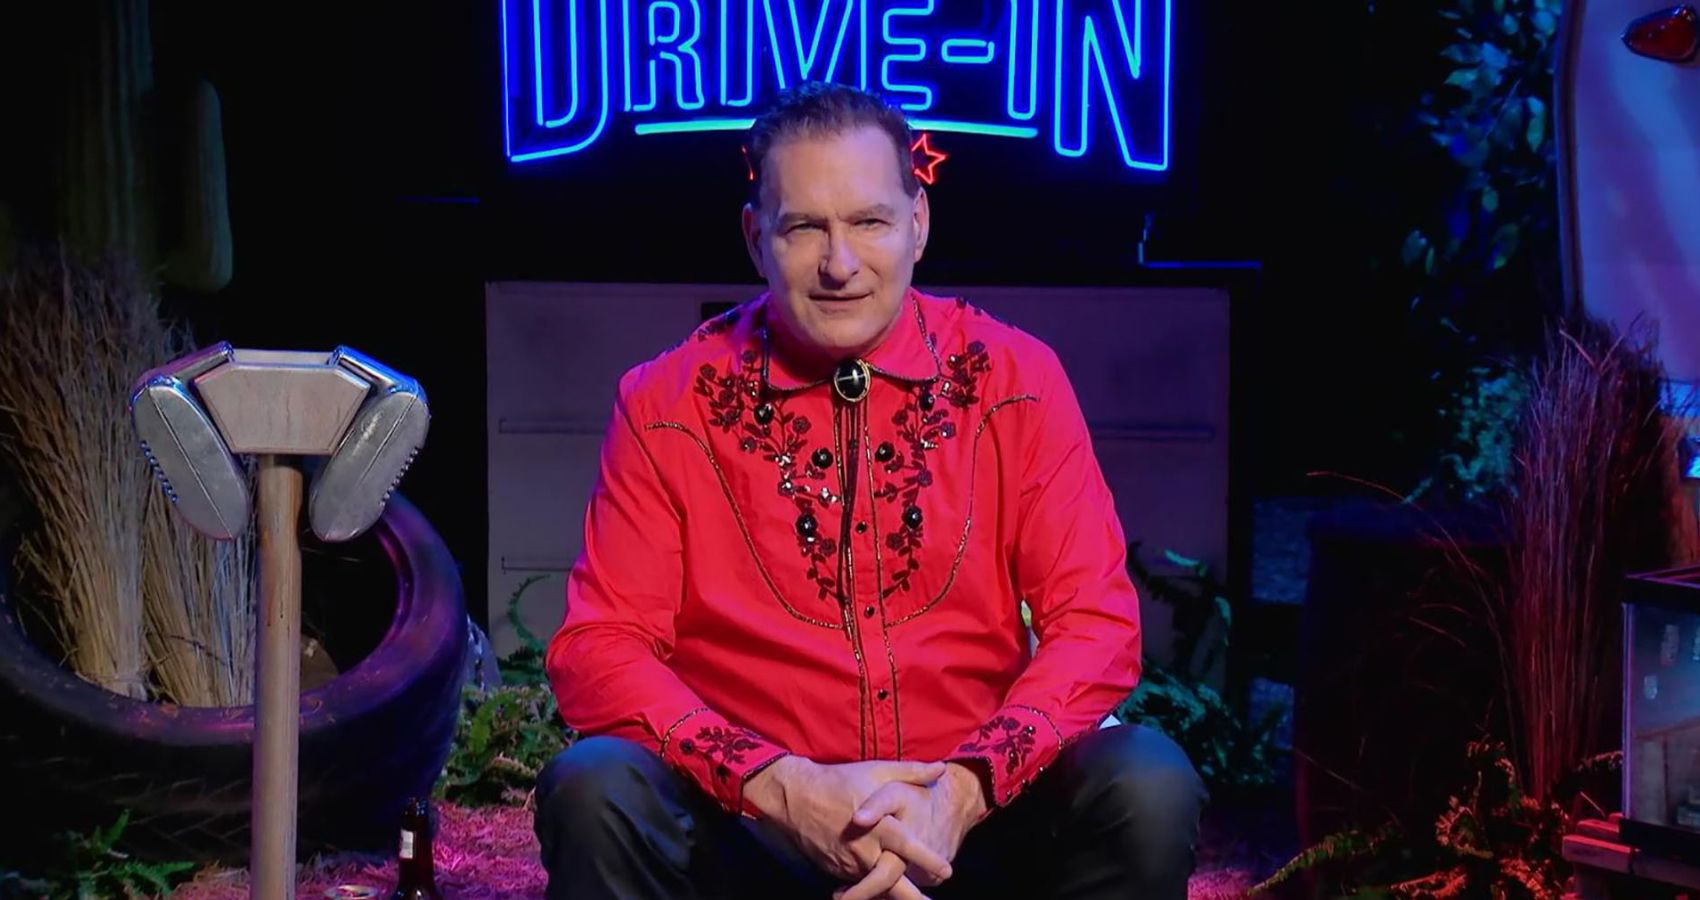 Why The Last Drivein's Joe Bob Briggs Needs to Be the Star of His Own